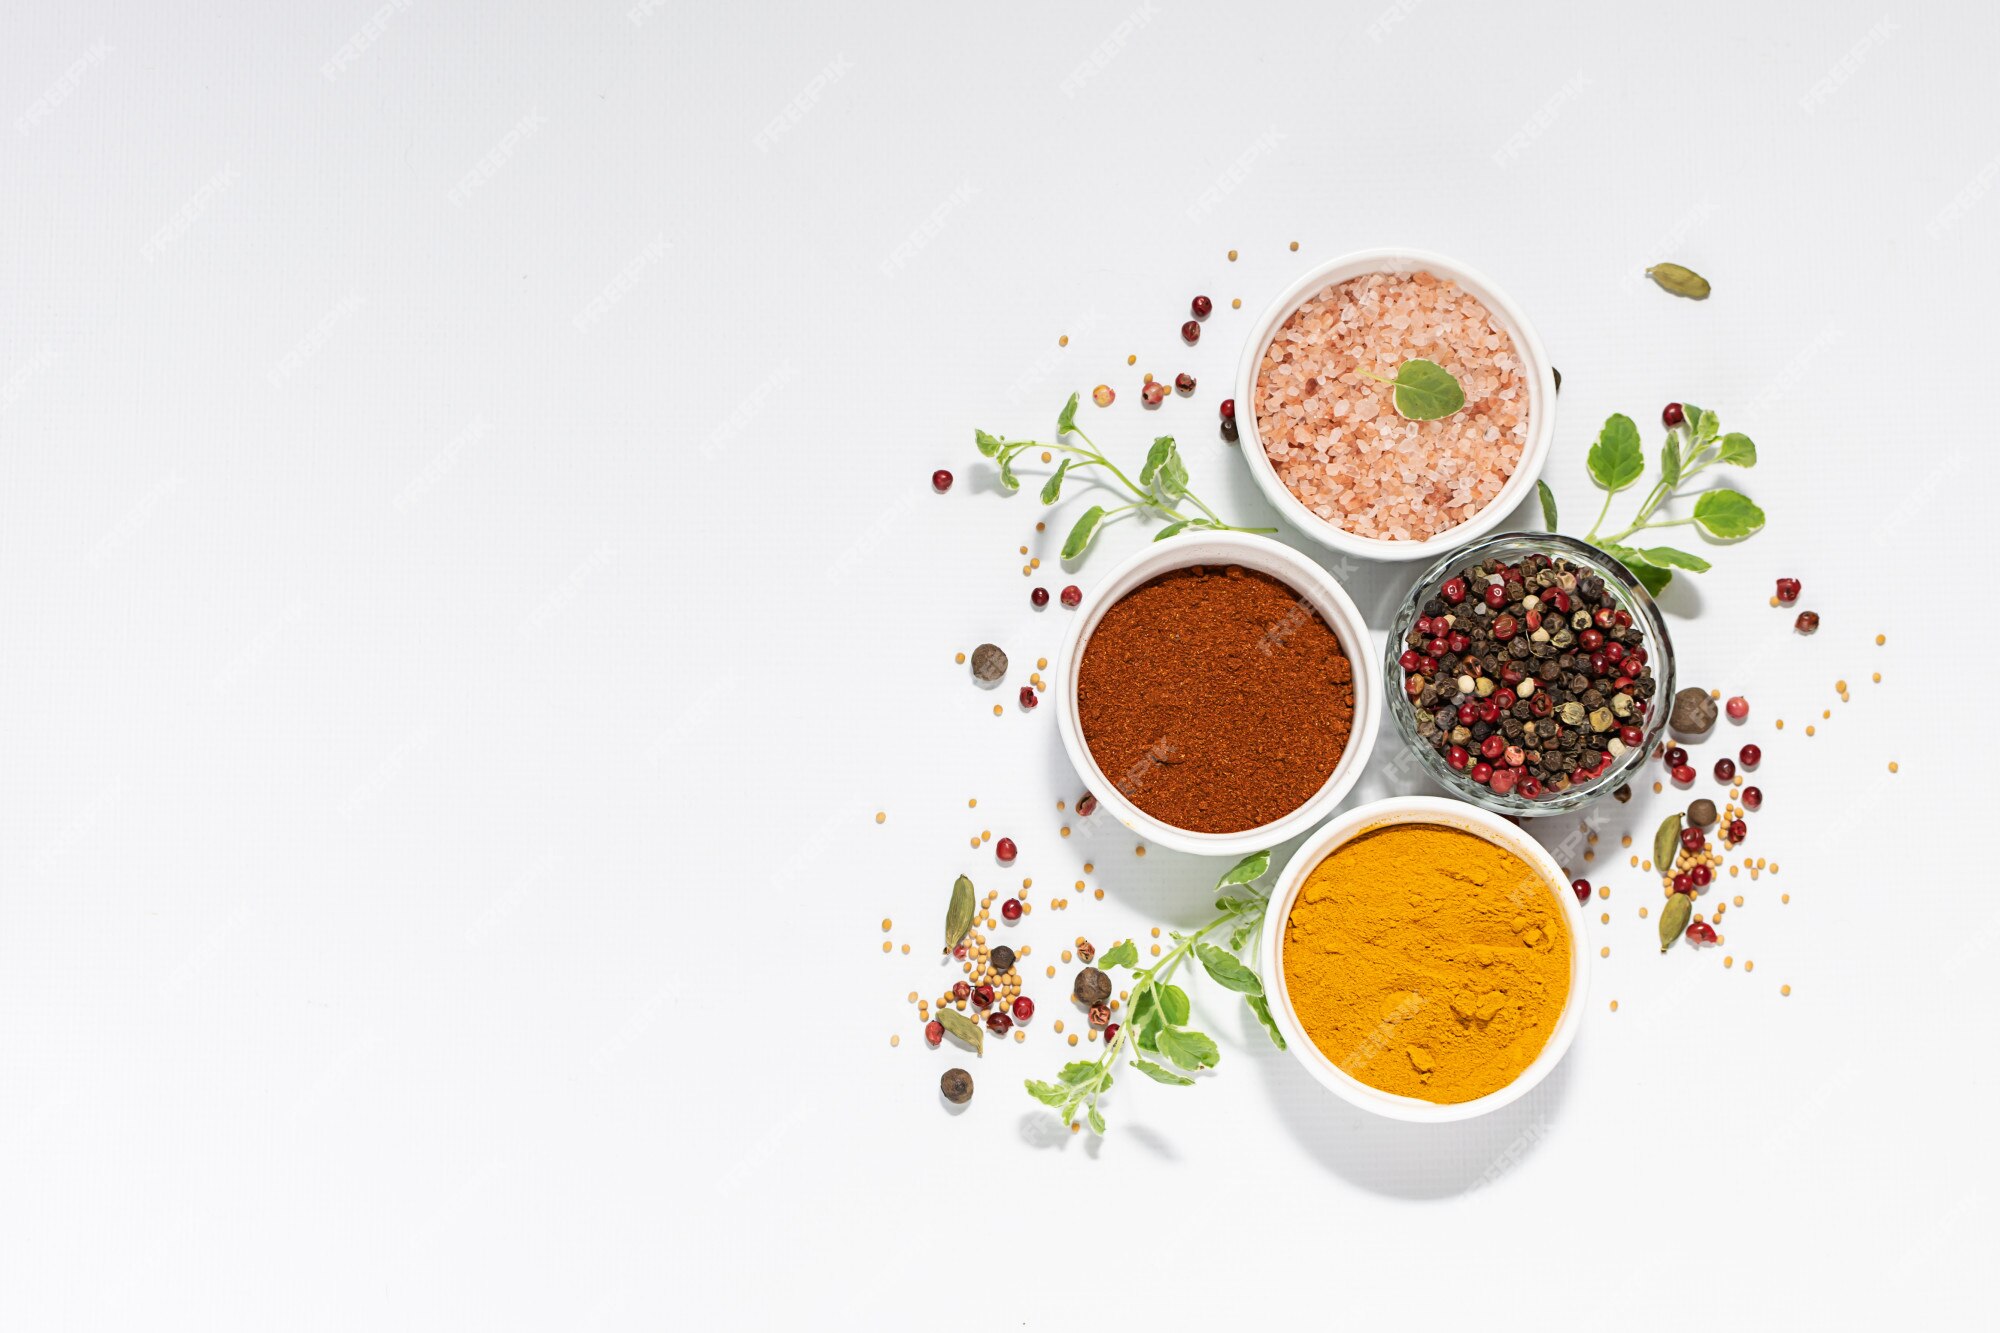 Premium Photo | Assortment of spices and herbs on white background